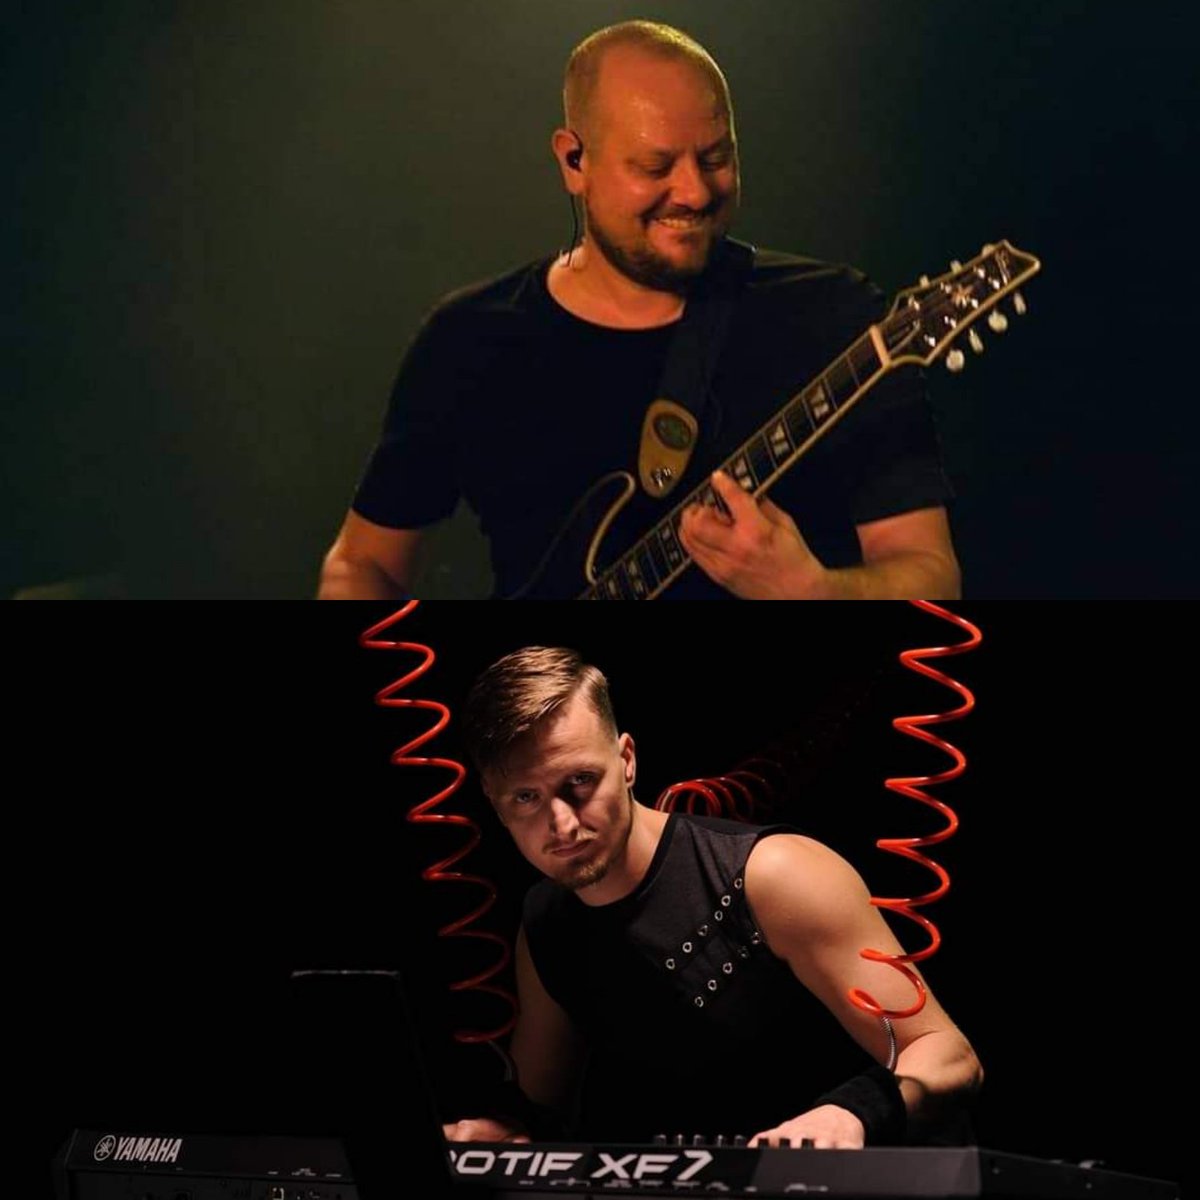 We are pleased to announce that Ivo and Arthur (both from Manora) will be guest musicans on our upcoming album.
#chironsreturn #metal #manora #music #melodicmetal #symphonic #followus #metalmusic #l4l #picoftheday #band #metalband #metal2021